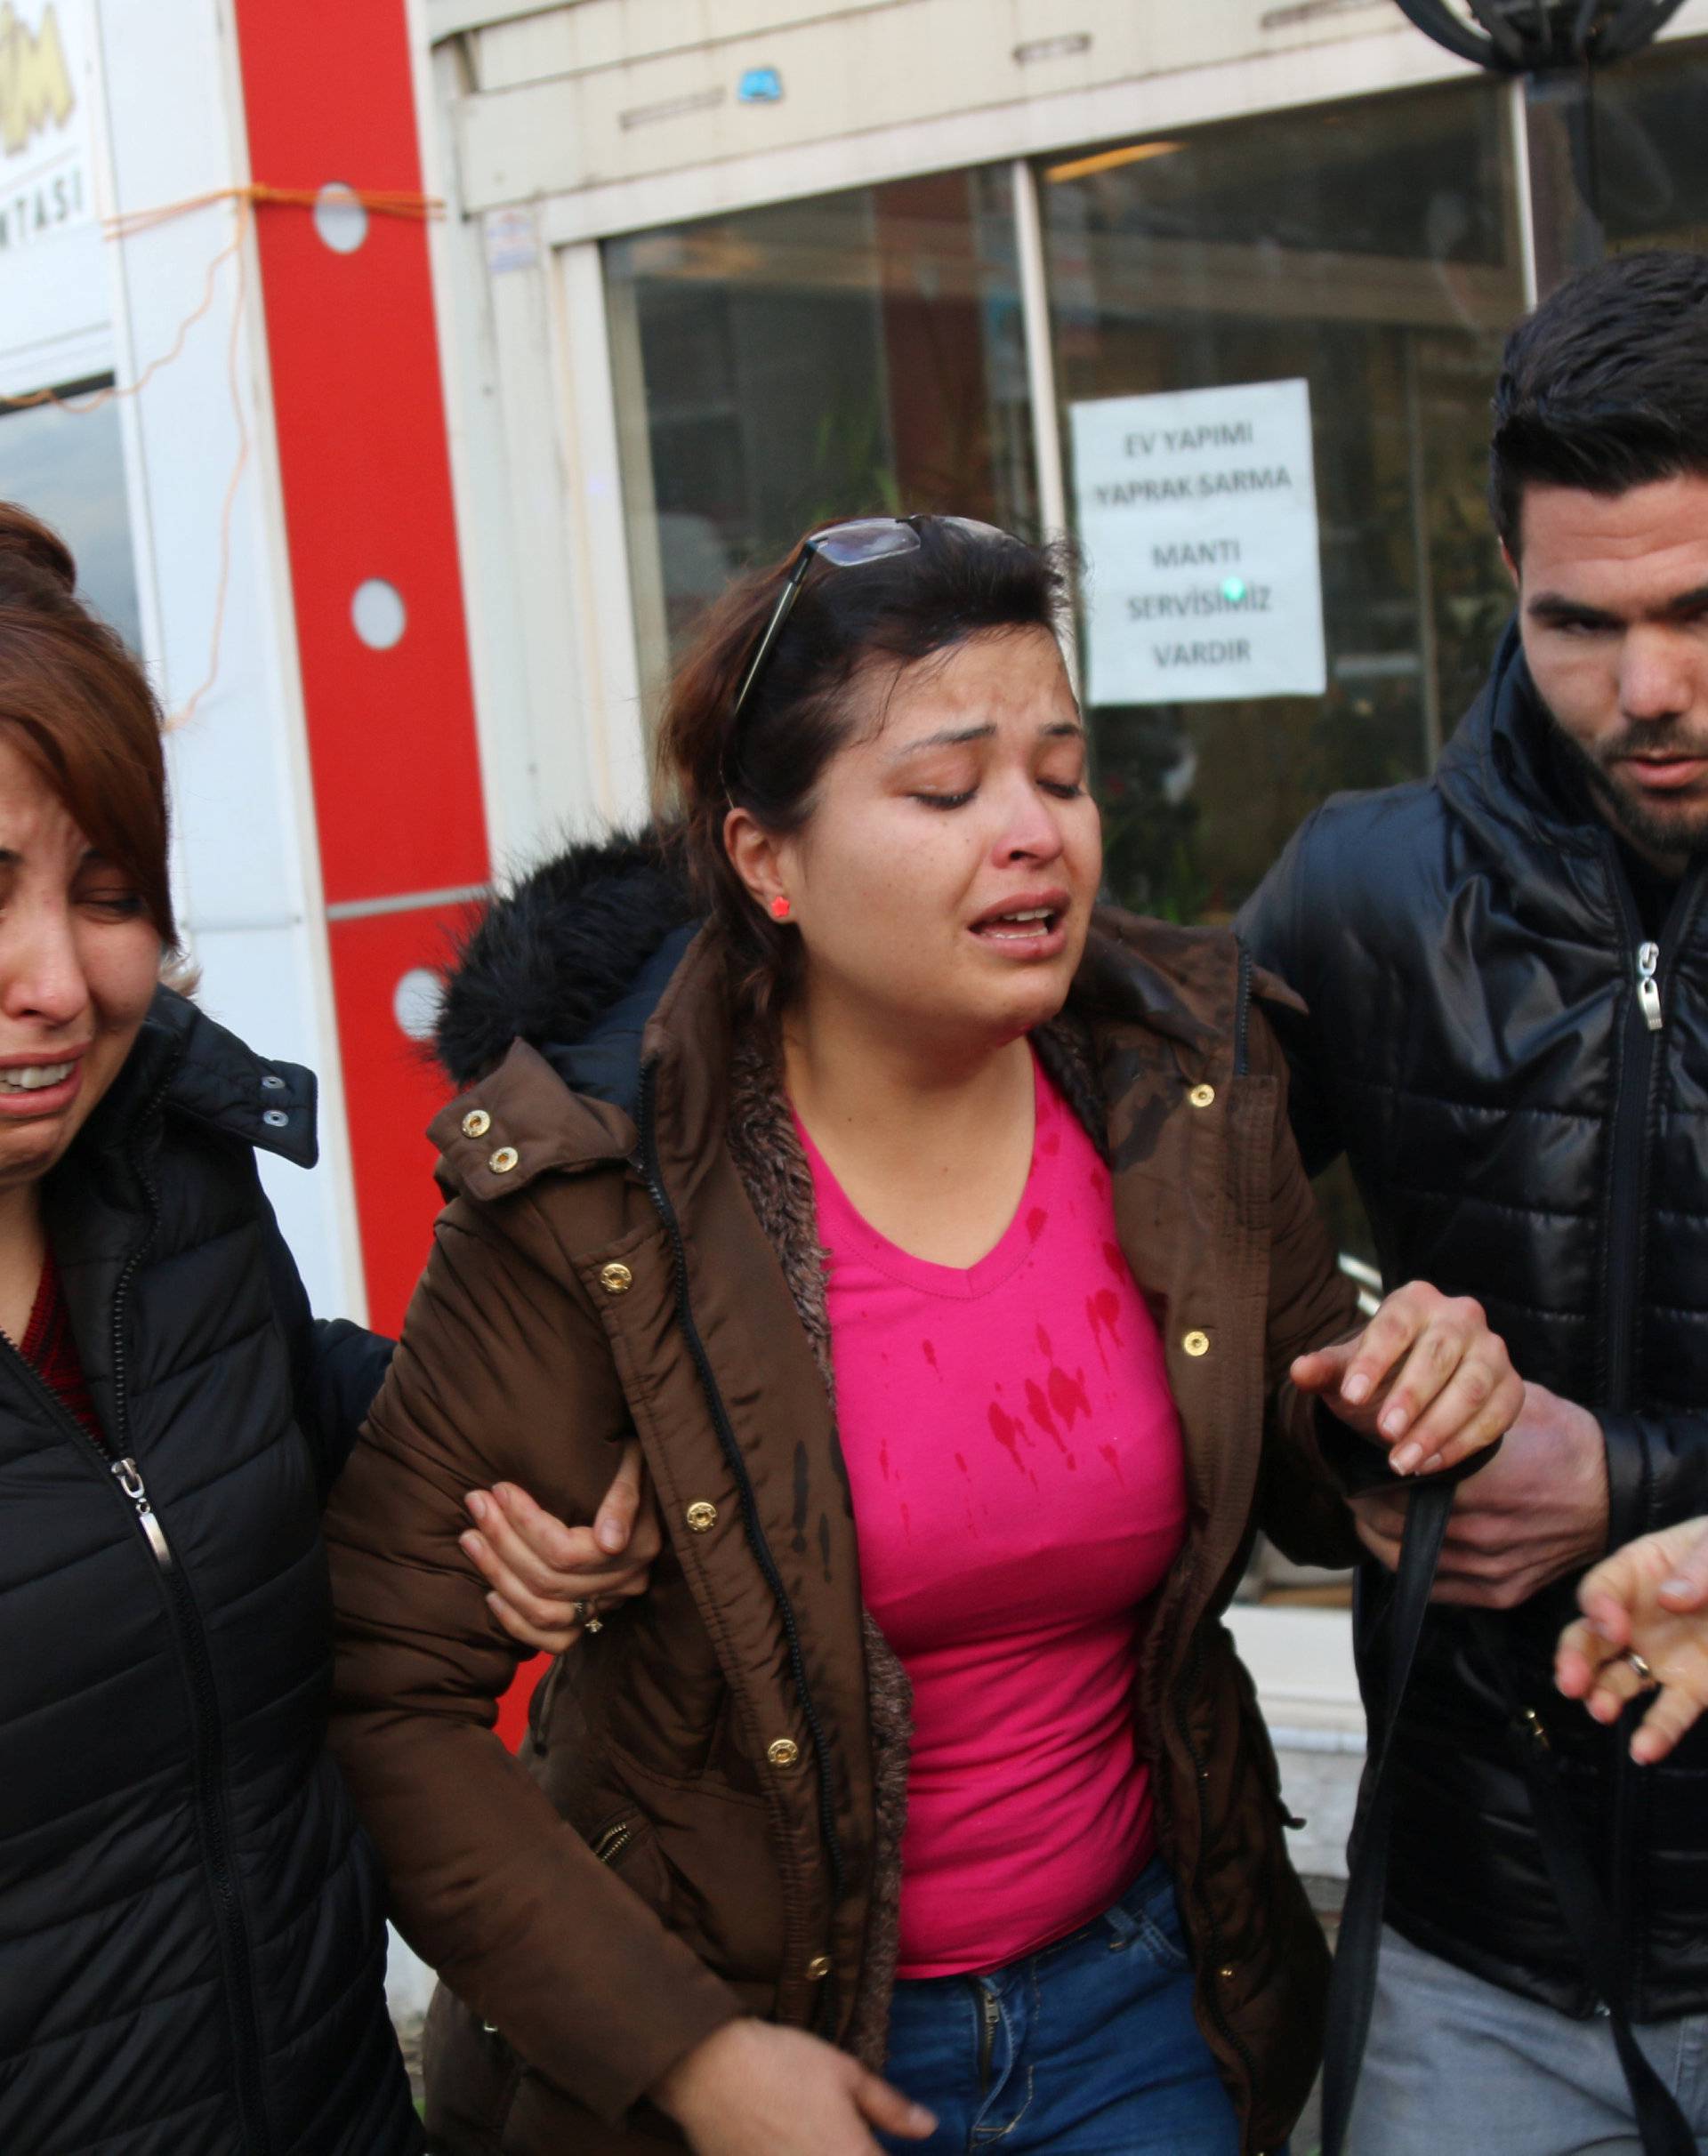 People react after an explosion outside a courthouse in Izmir